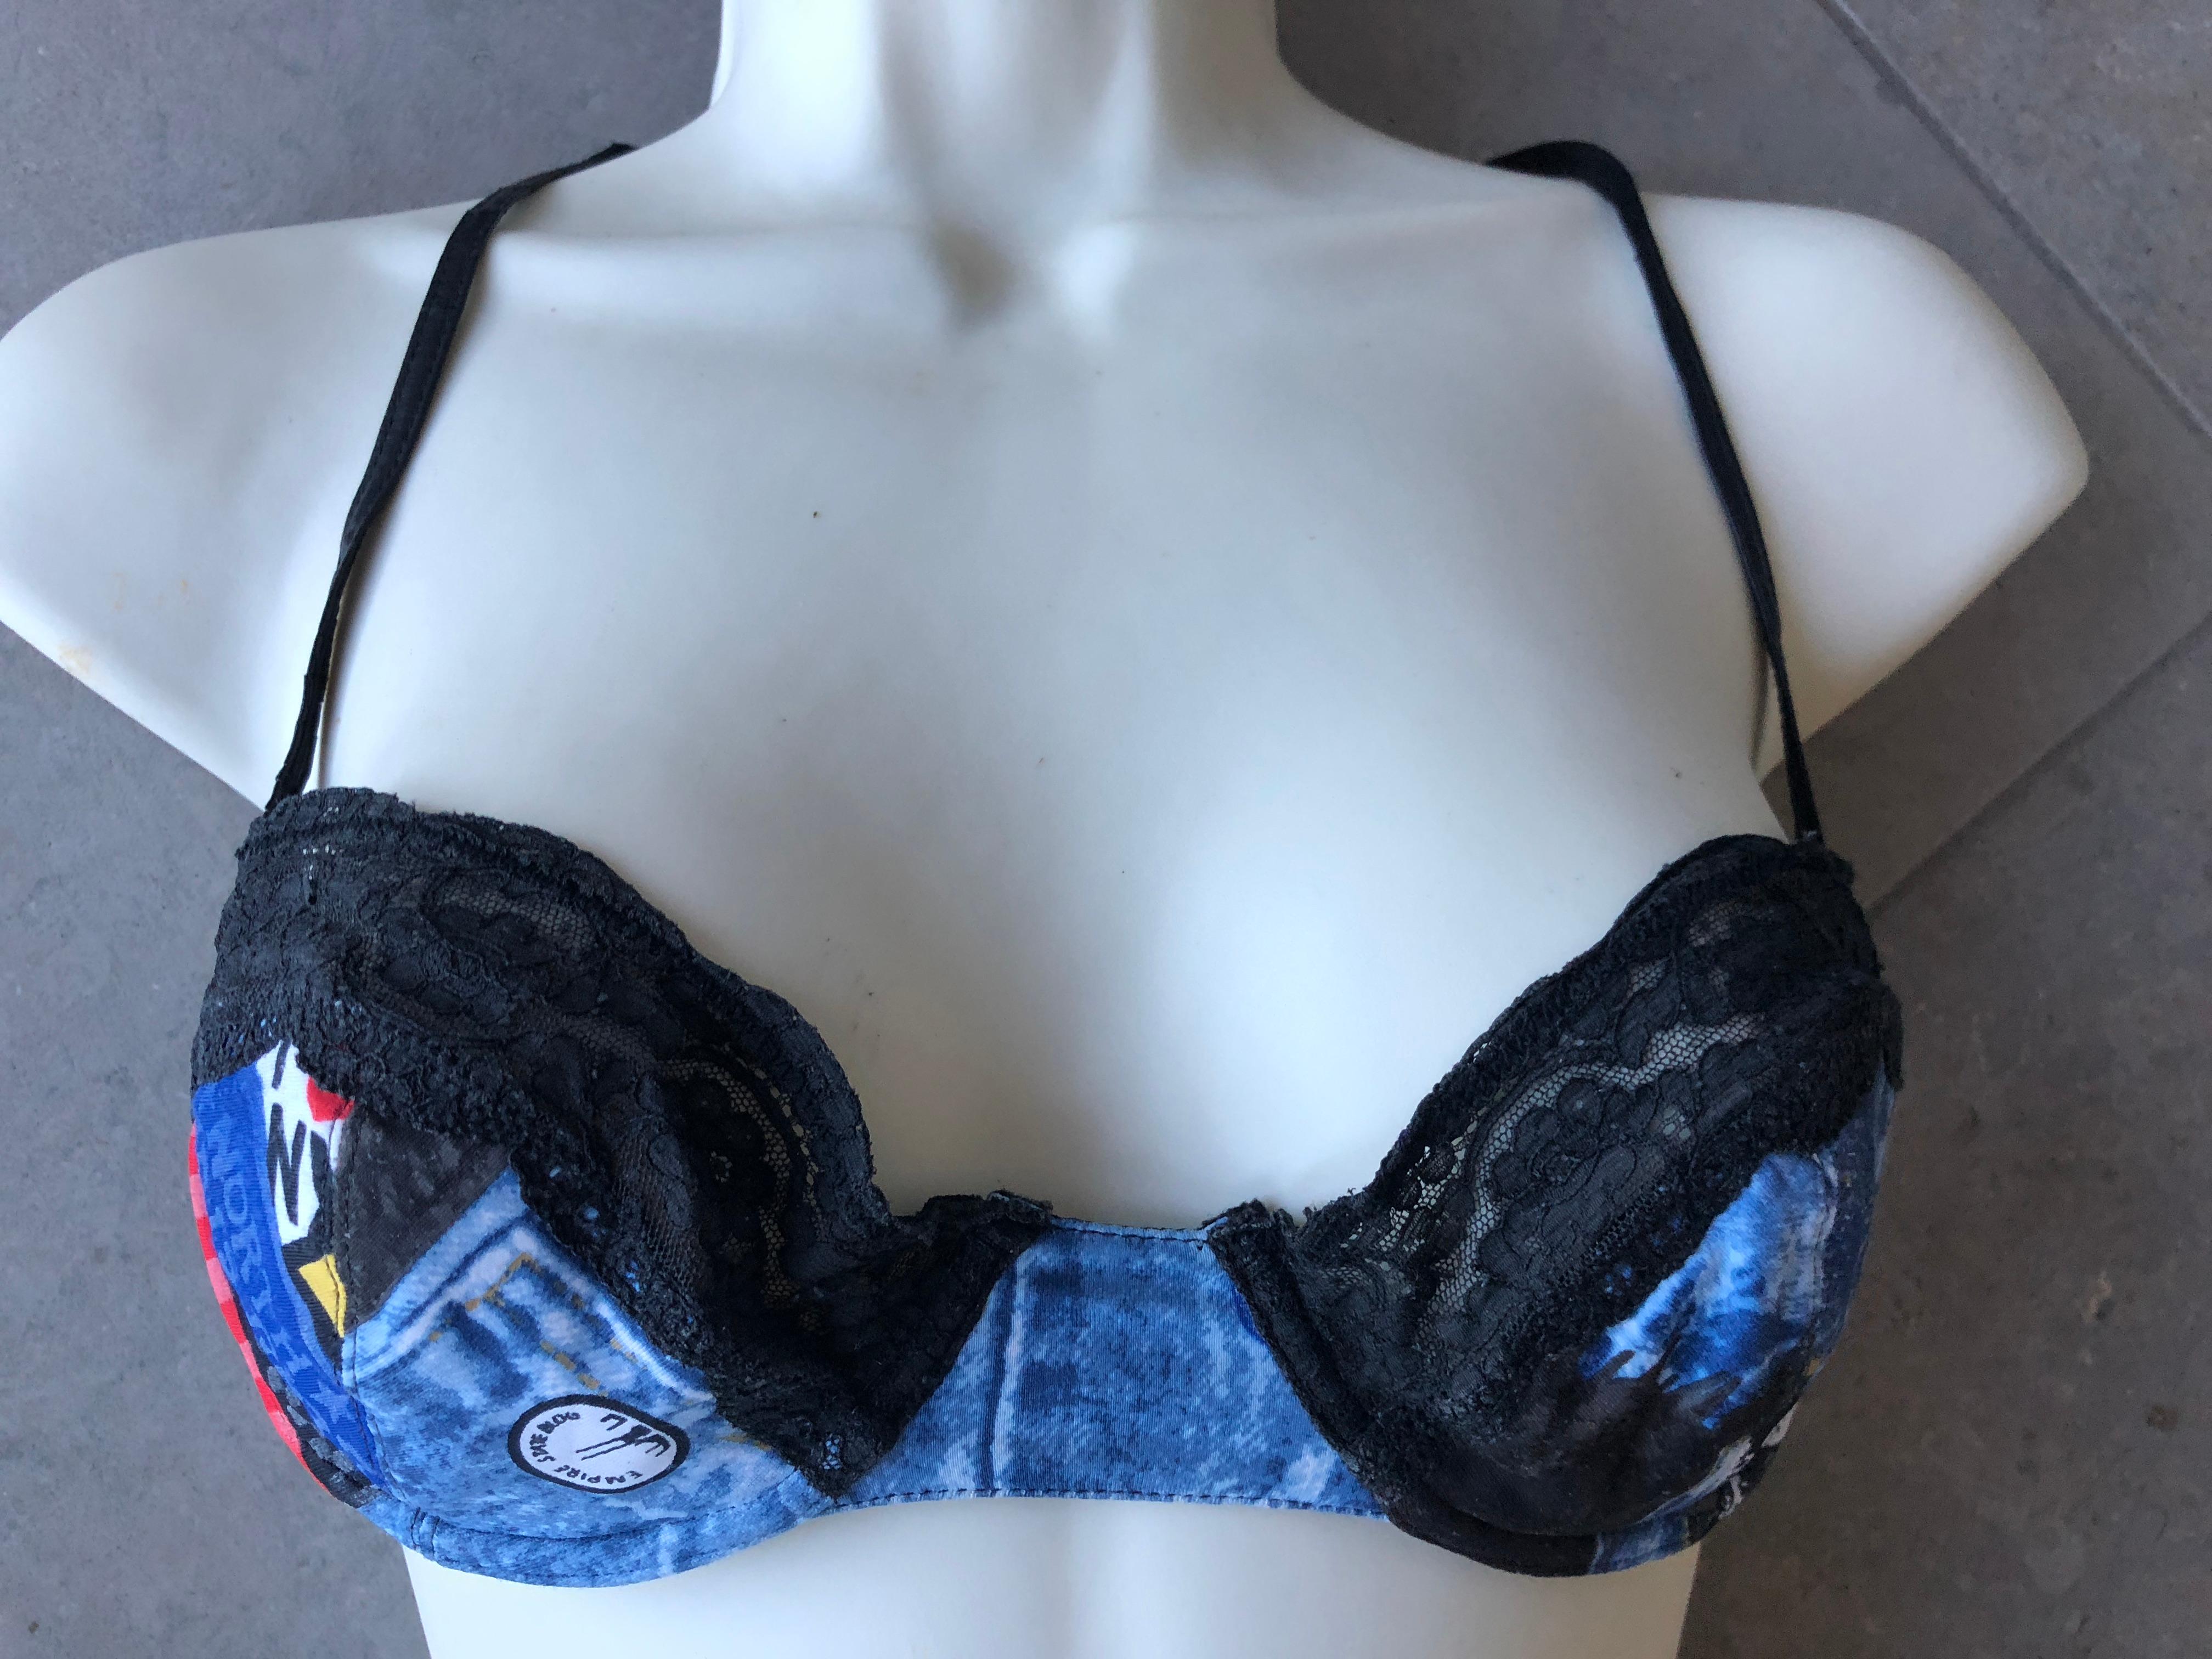 Wonderful vintage lace bra from Christian Dior 
Cotton with corset lace details.
Marked Fr 90 (34B)
Bust 29